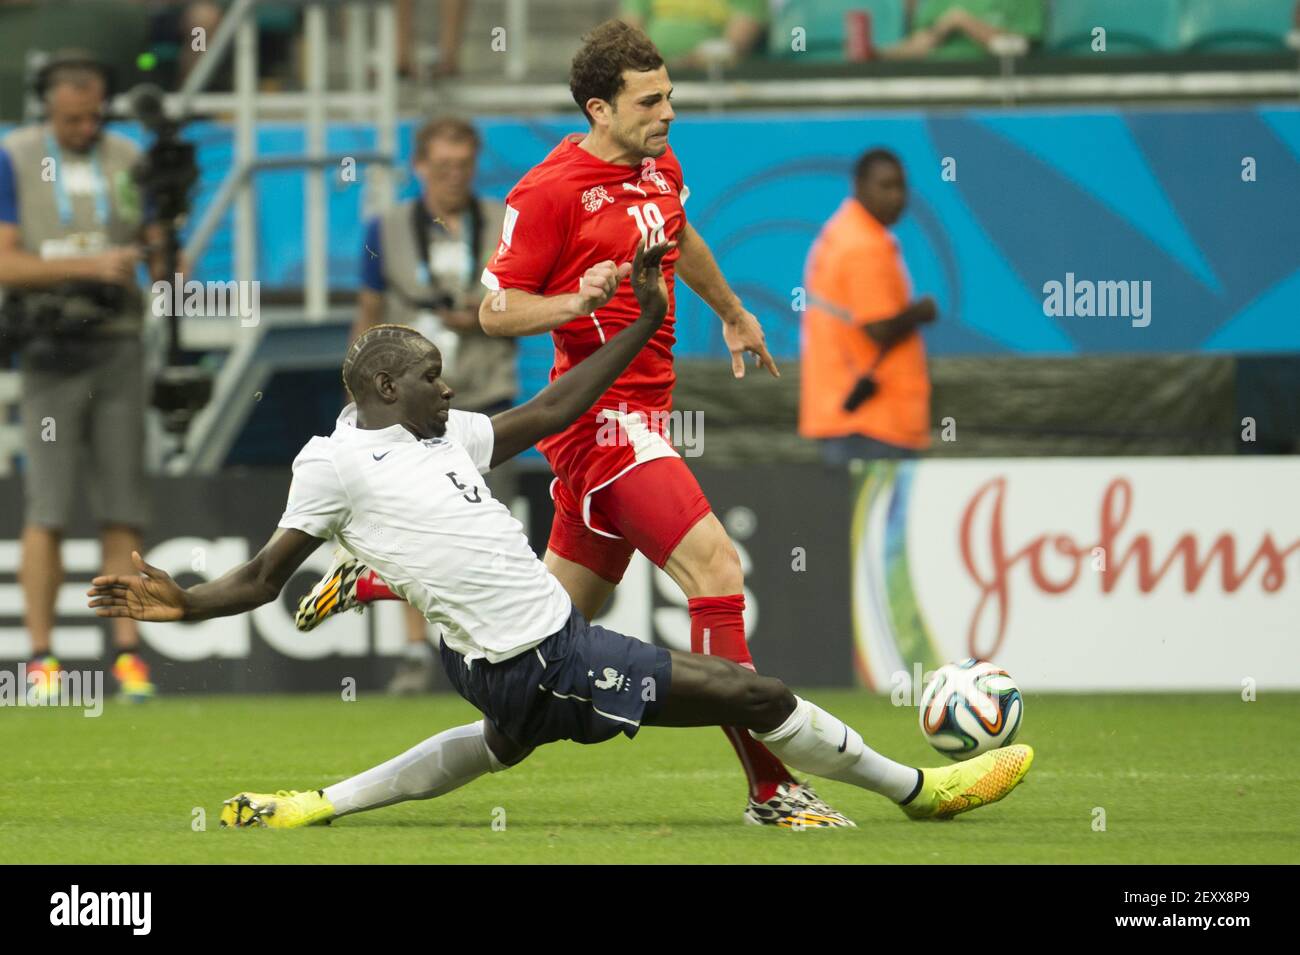 France's MAMADOU SKHO (L) fights for the ball with Switzerland's ADMIR  MEHMEDI (R) during the group E 2014 FIFA World Cup soccer match between  Switzerland and France, in Arena Fonte Nova Stadium